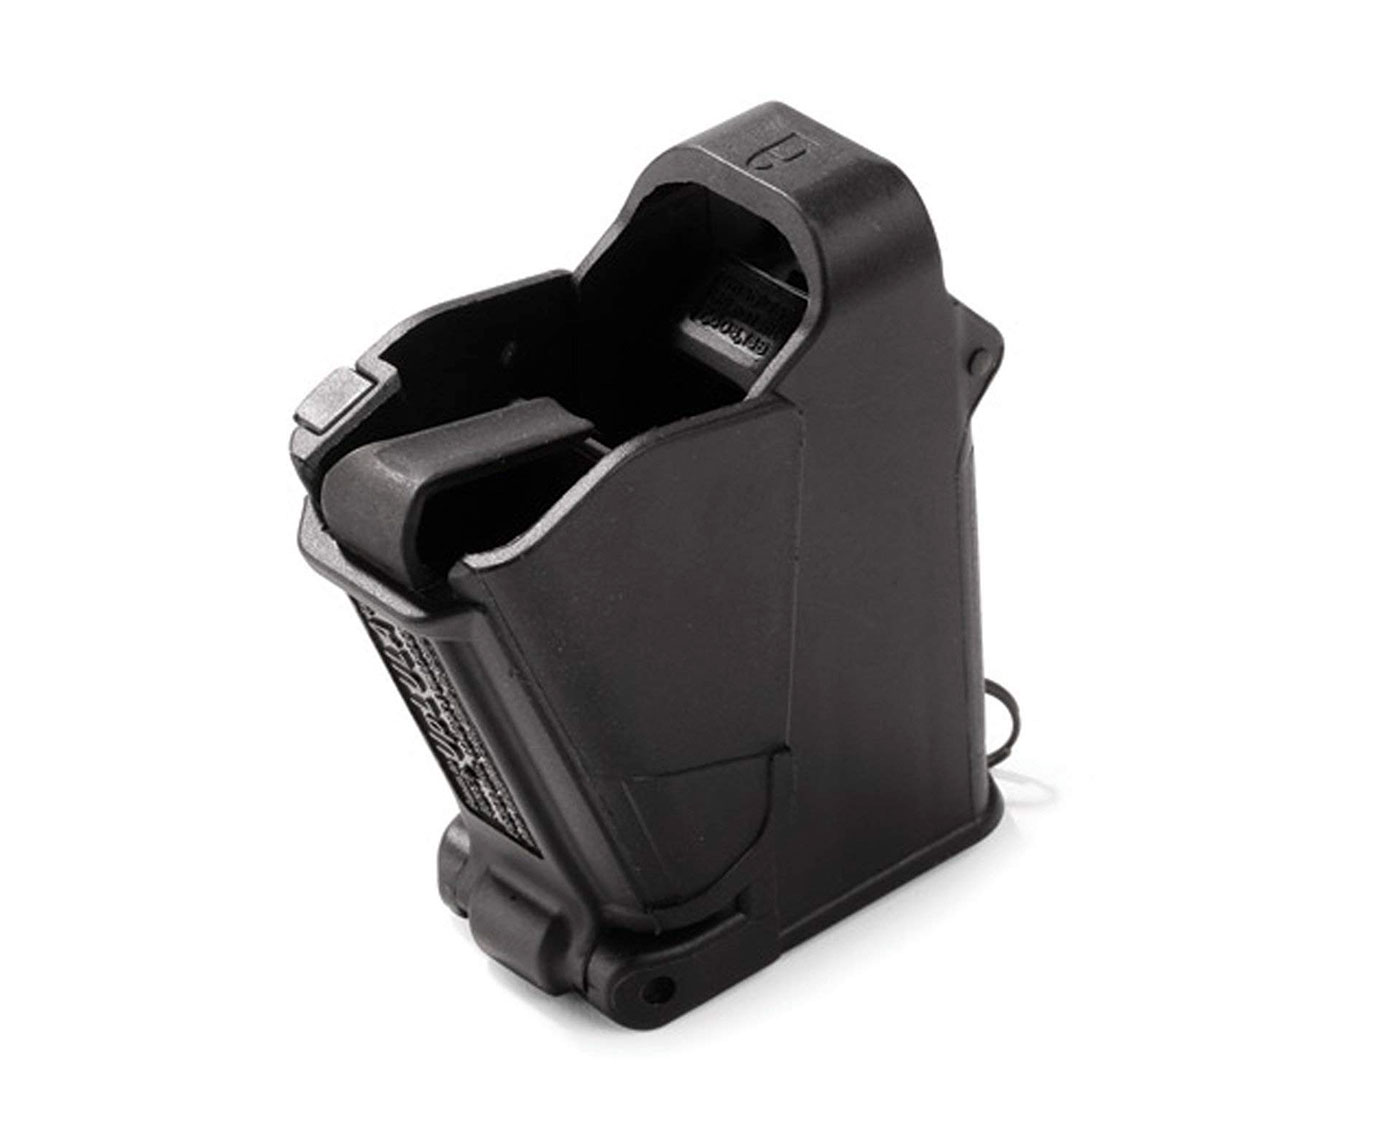 Universal Speed Loader Magazine Loader For 9mm 40S&W Magazines Dropshipping TG 